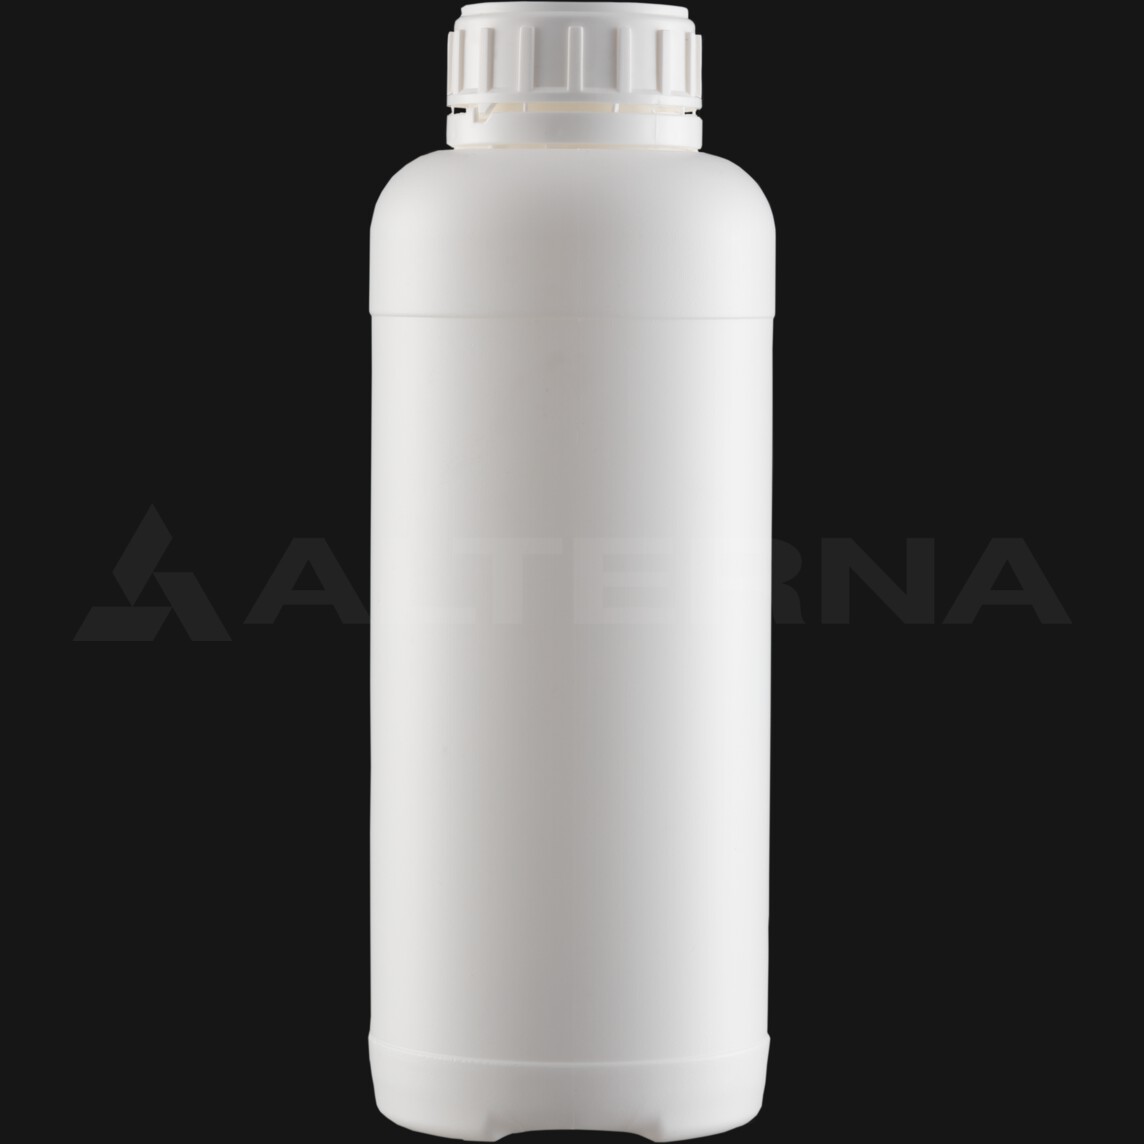 1000 ml HDPE Bottle with 50 mm Foam Seal Vented Secure Cap